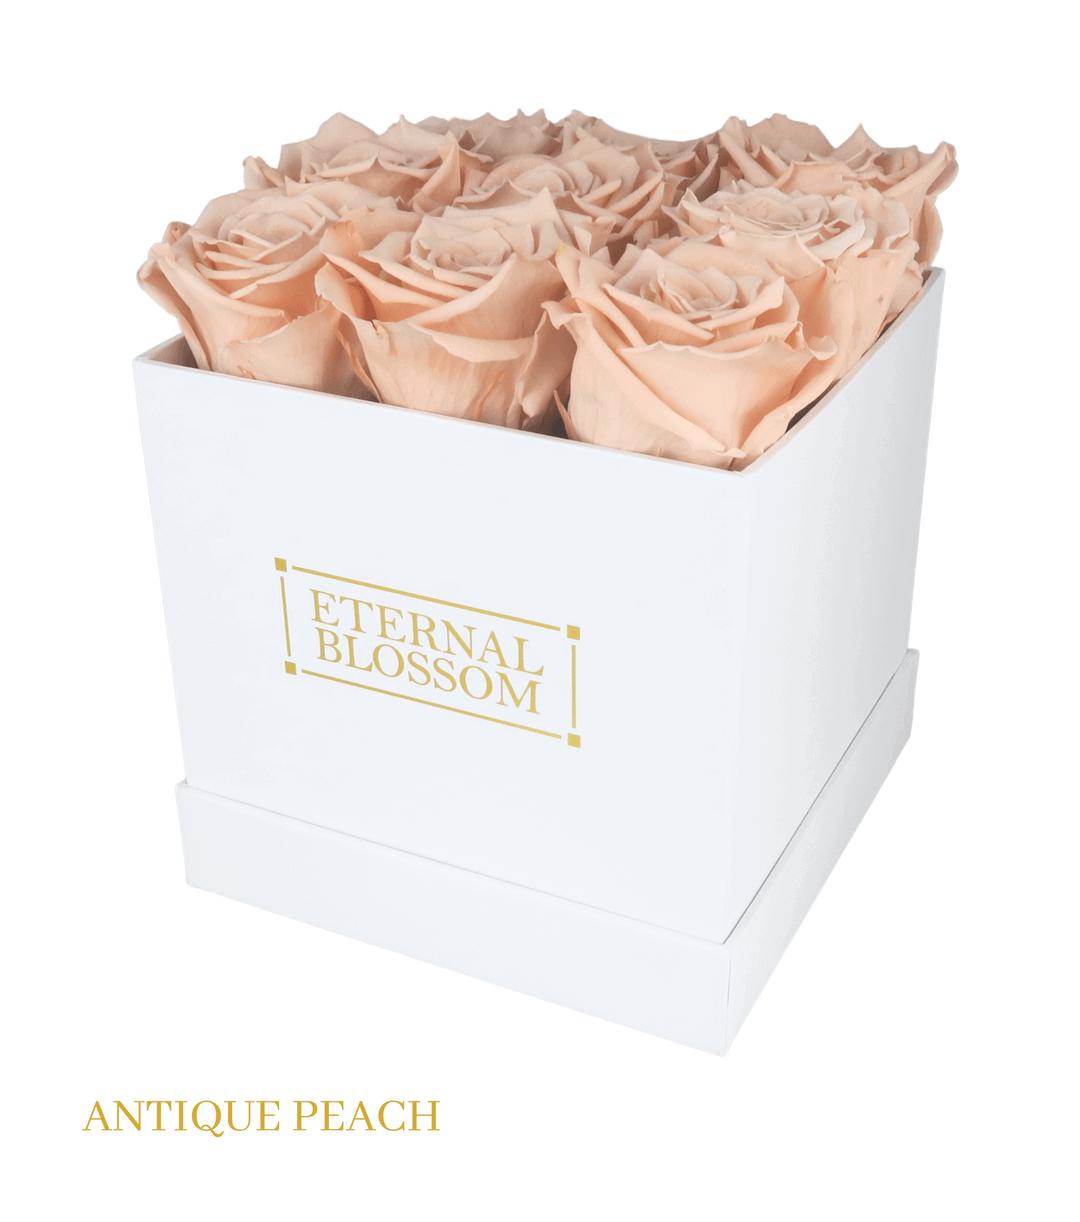 9 Piece Blossom Box - White Box - All Colours of Year Lasting Infinity Roses